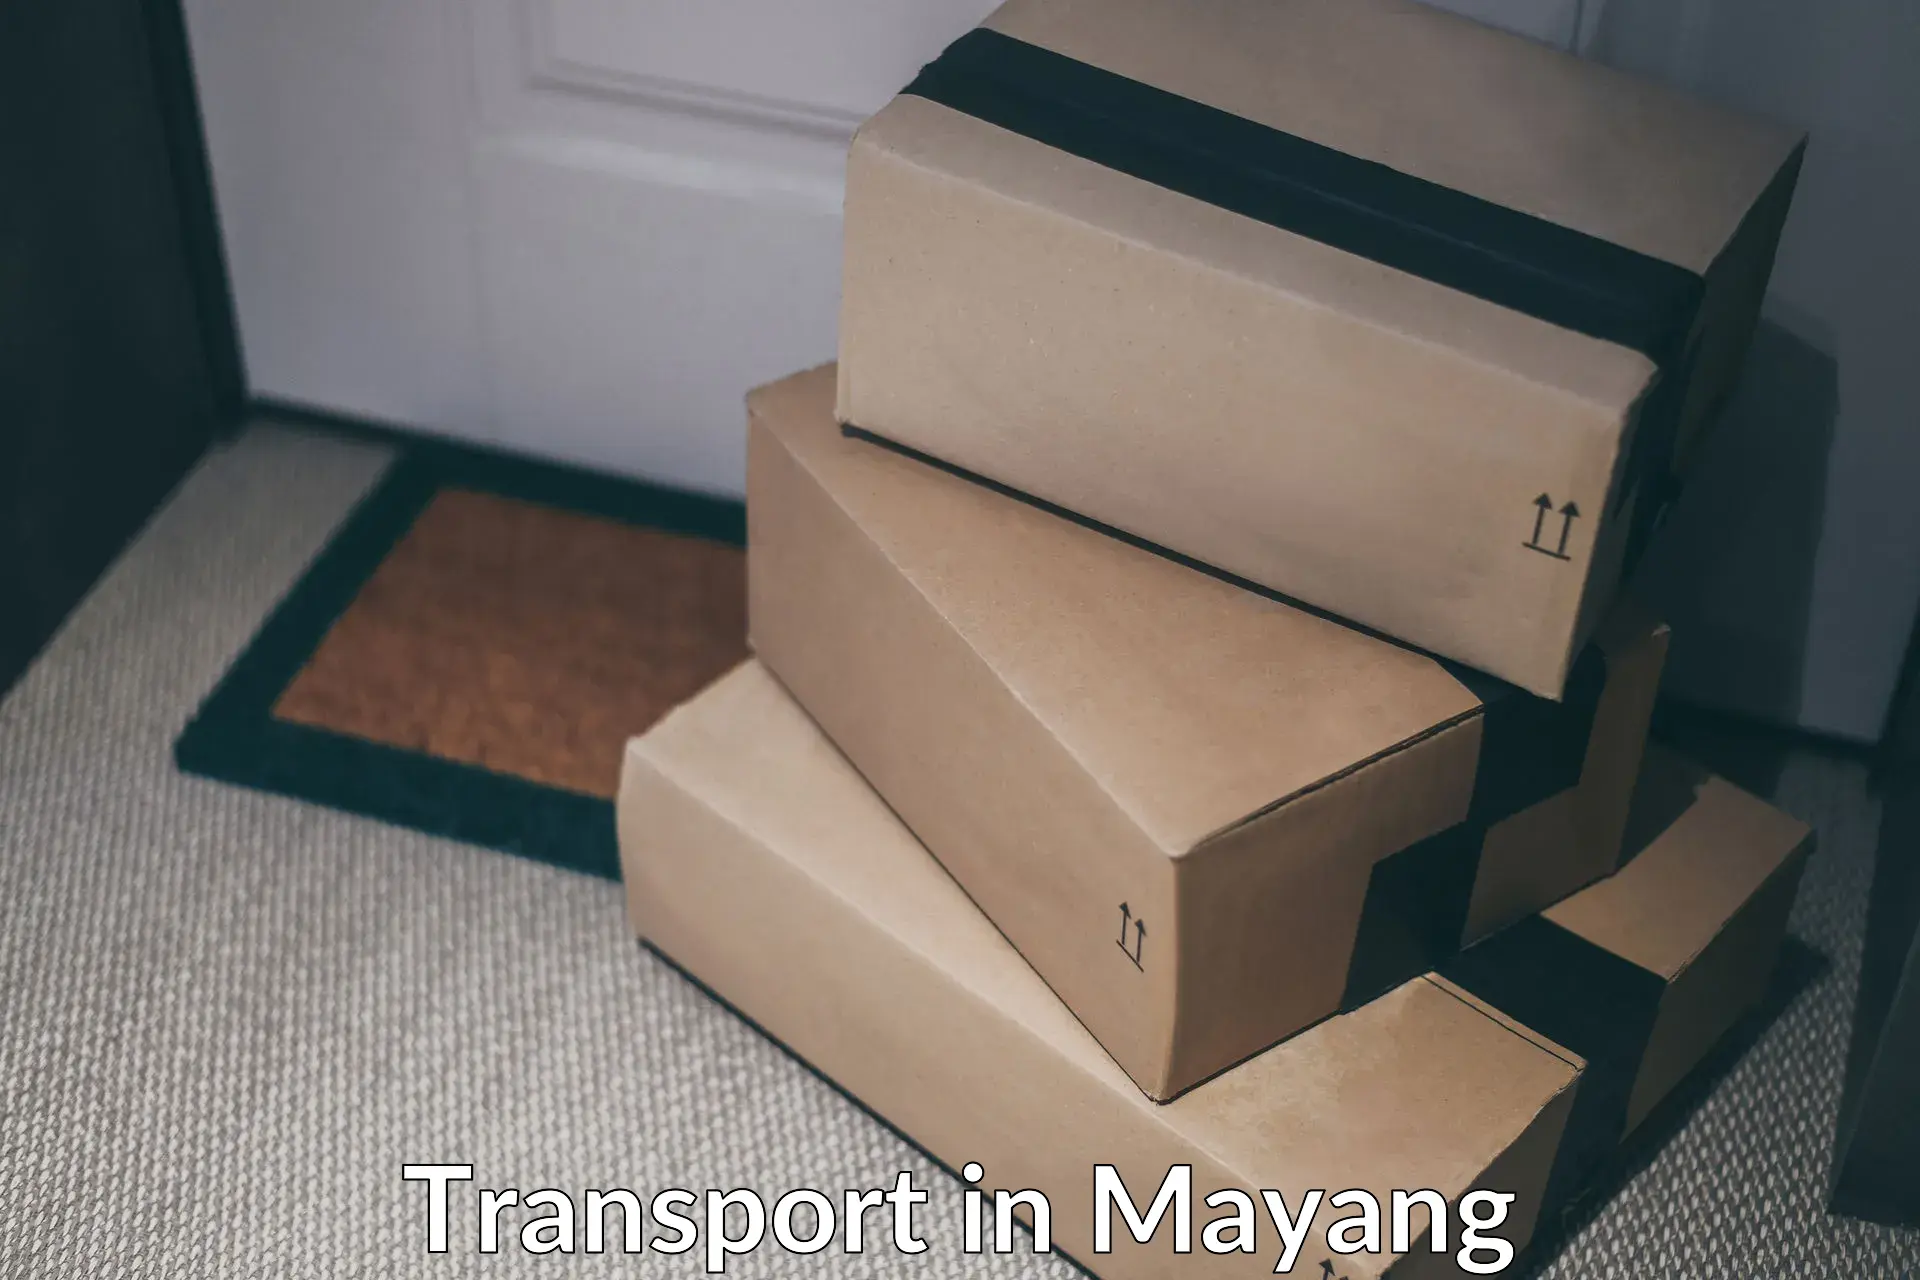 Goods transport services in Mayang